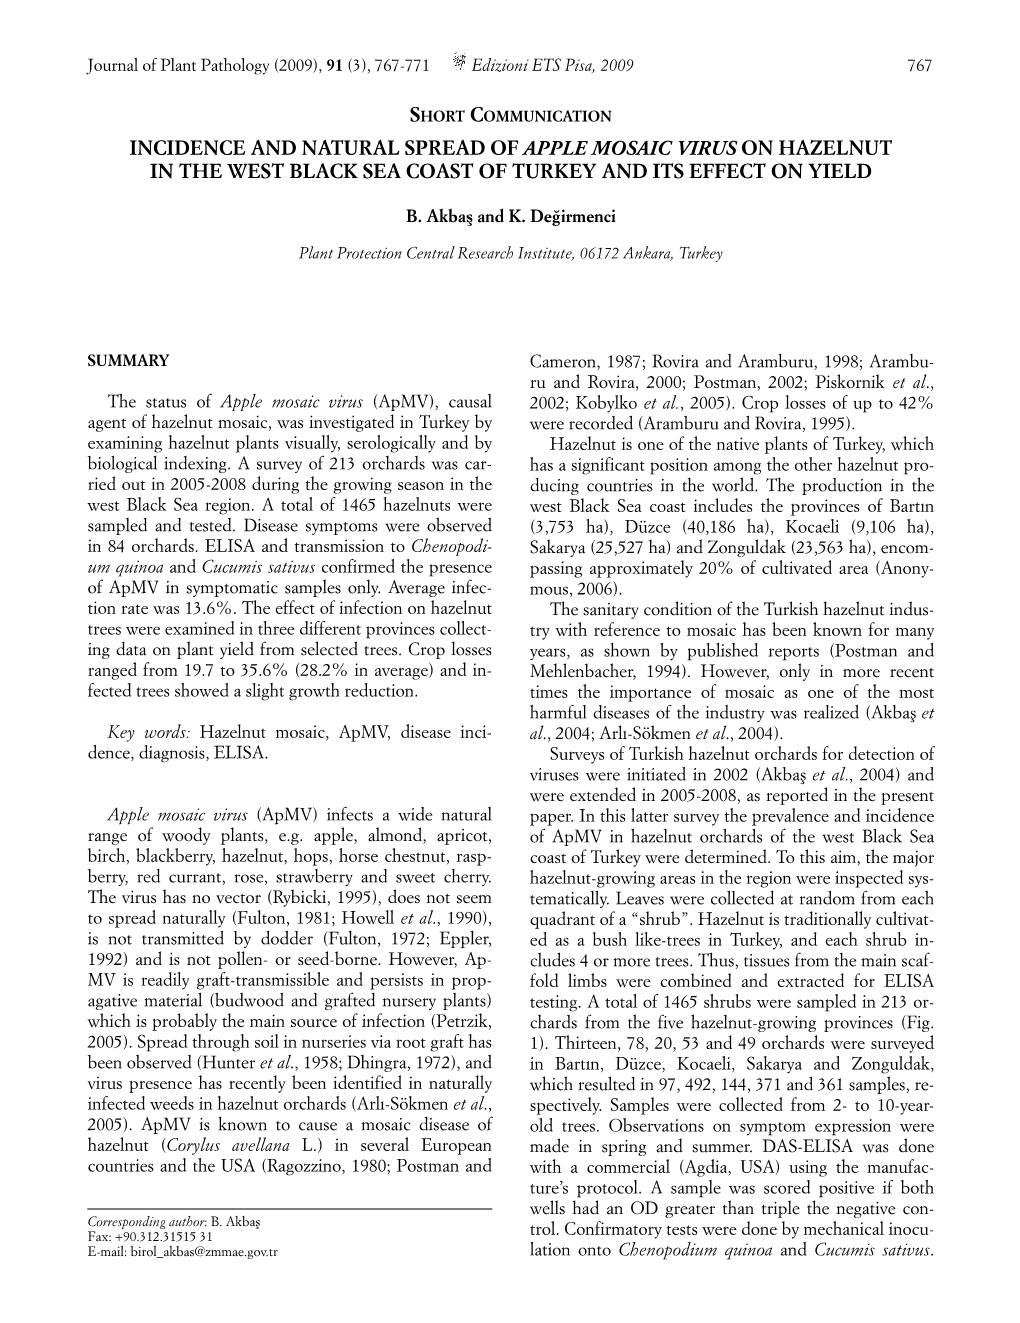 Incidence and Natural Spread of Apple Mosaic Virus on Hazelnut in the West Black Sea Coast of Turkey and Its Effect on Yield